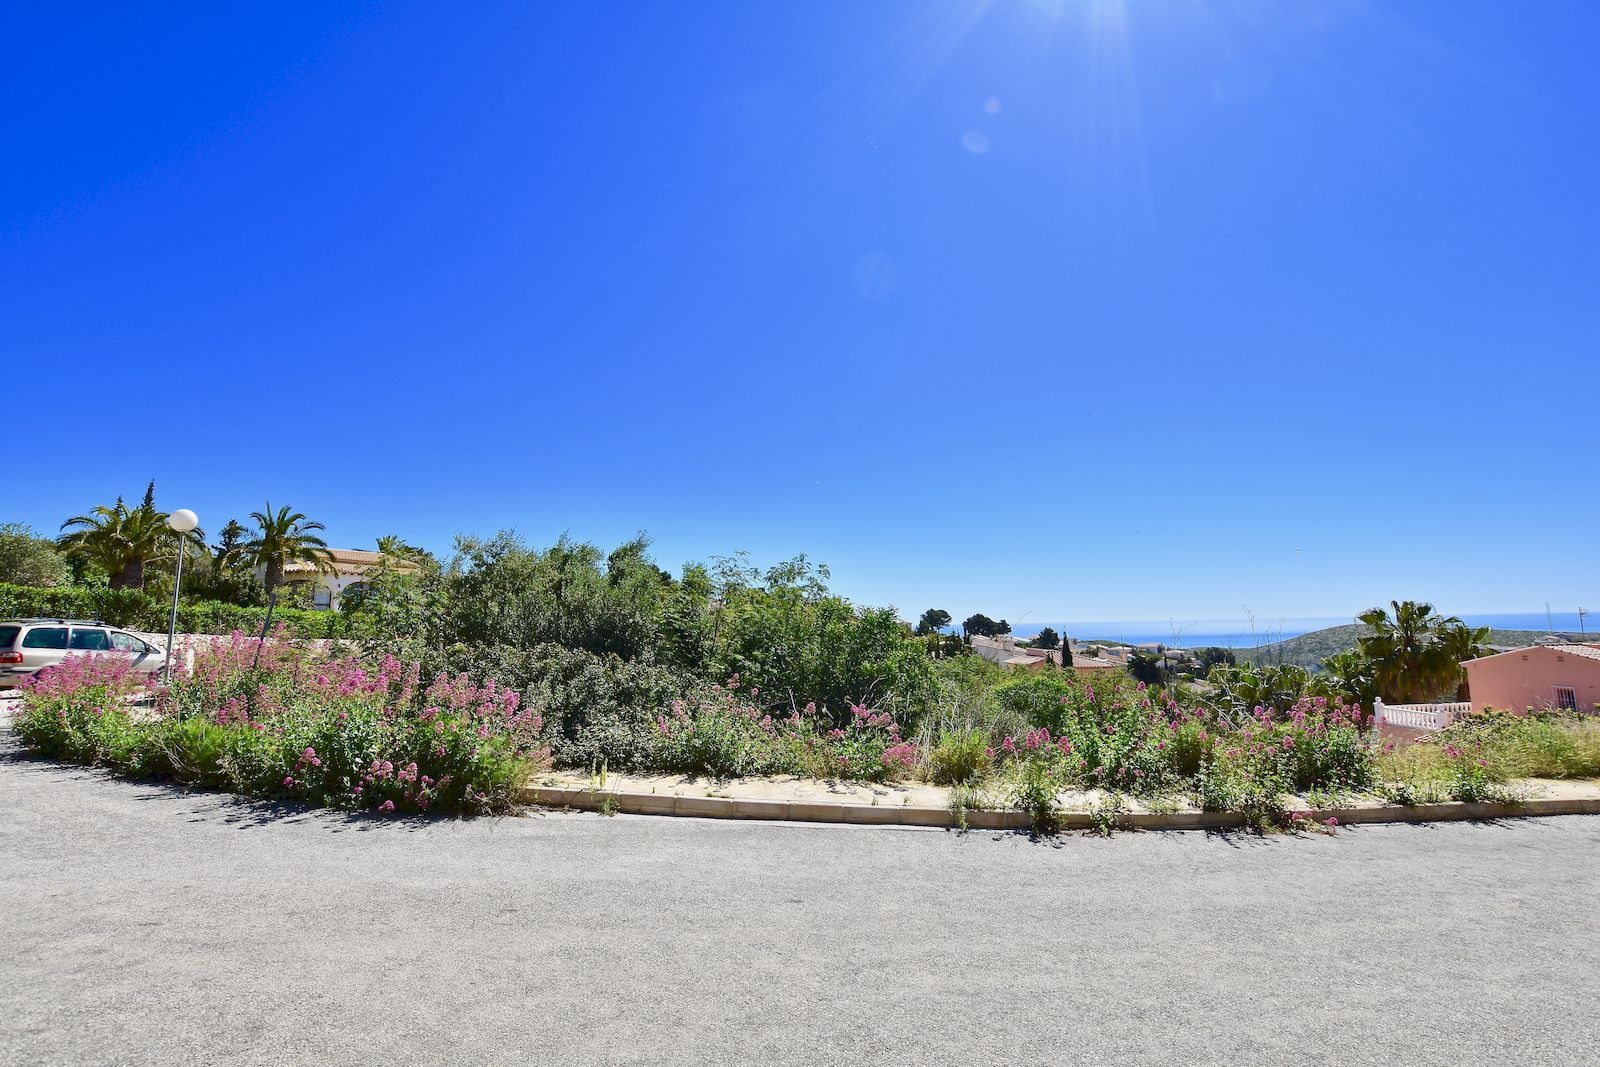 URBAN PLOT WITH SEA VIEWS FOR SALE IN BENITACHELL, COSTA BLANCA.